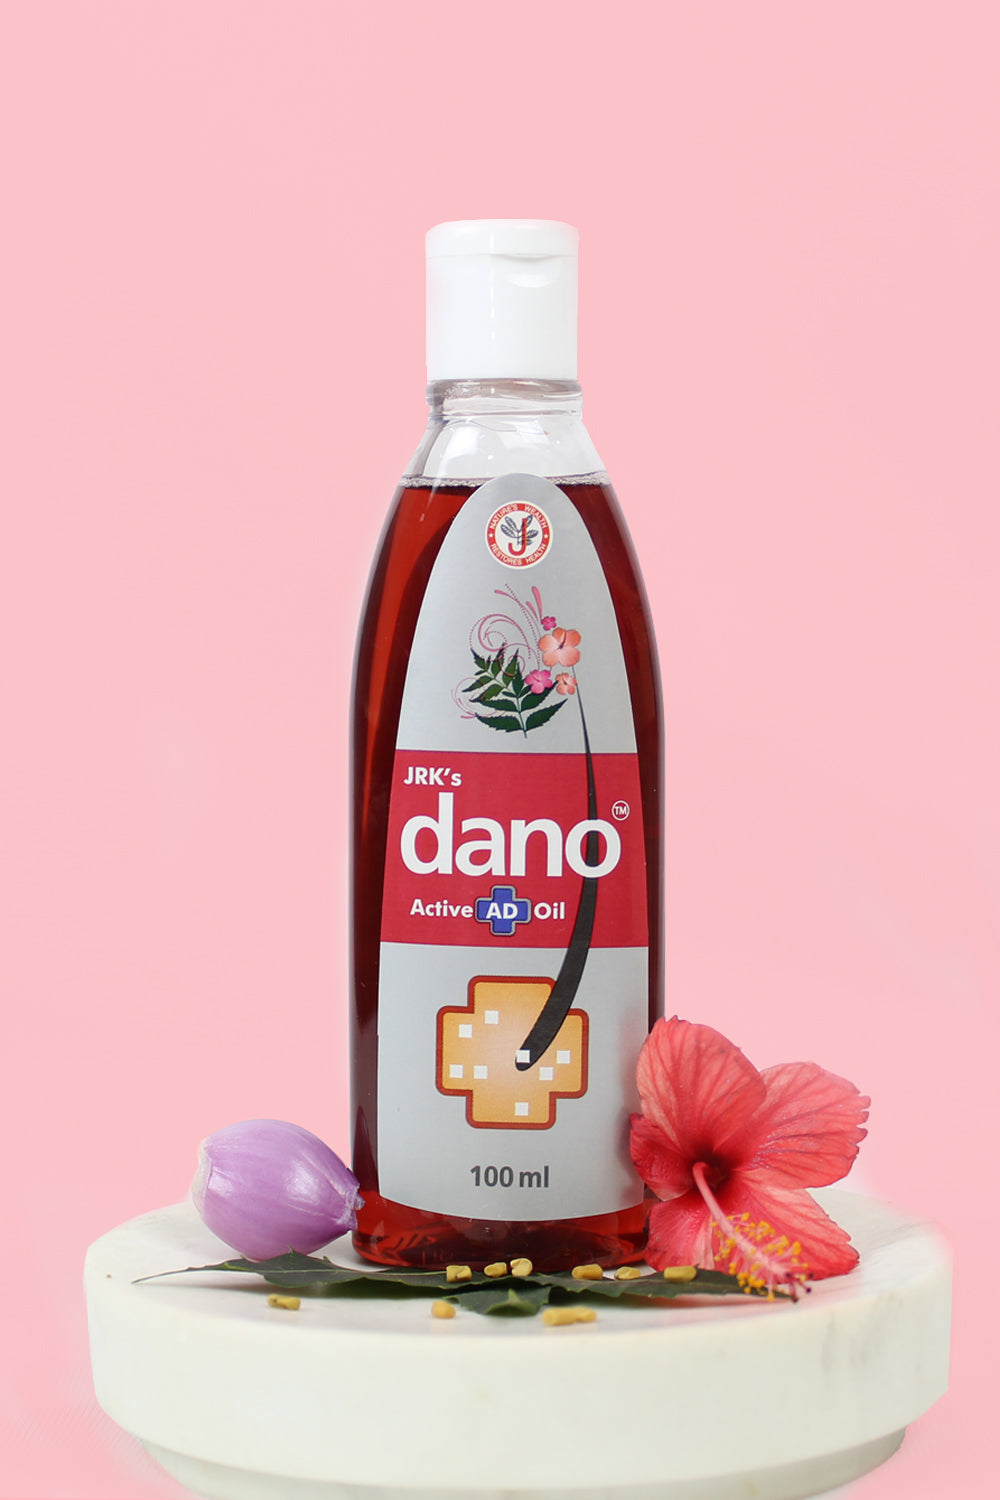 JRKs Dano Active AD Oil 100 ml Pack of 2